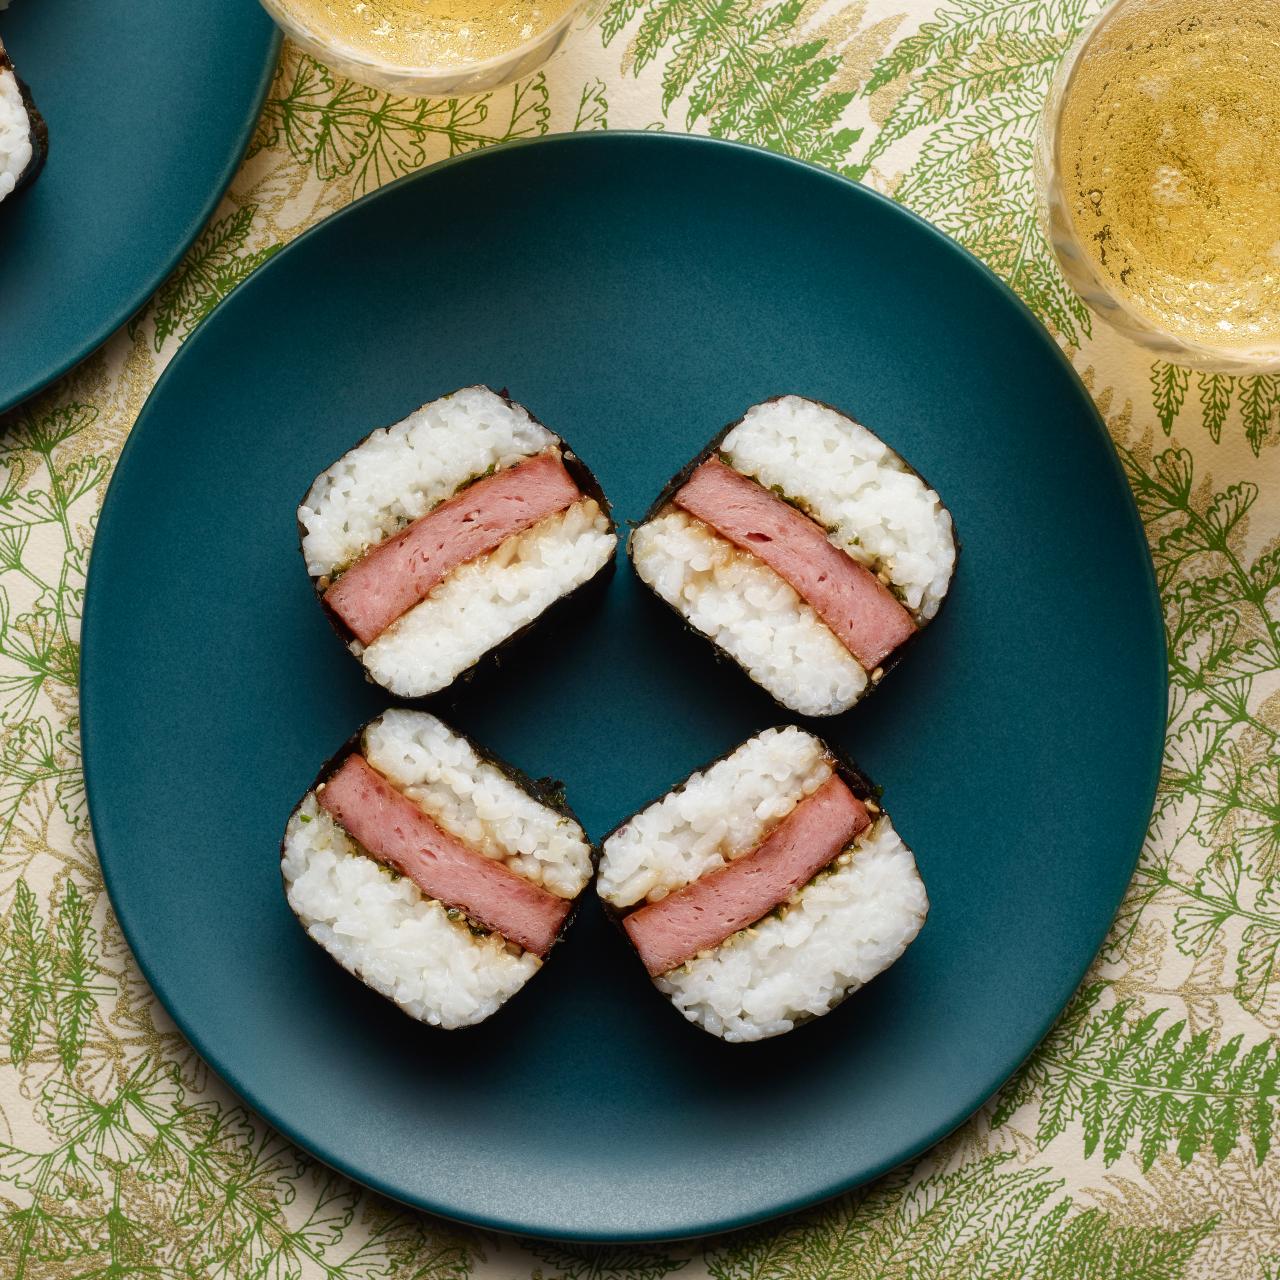 Spam Musubi Is My Go-To Anytime Snack, Here's How to Make It